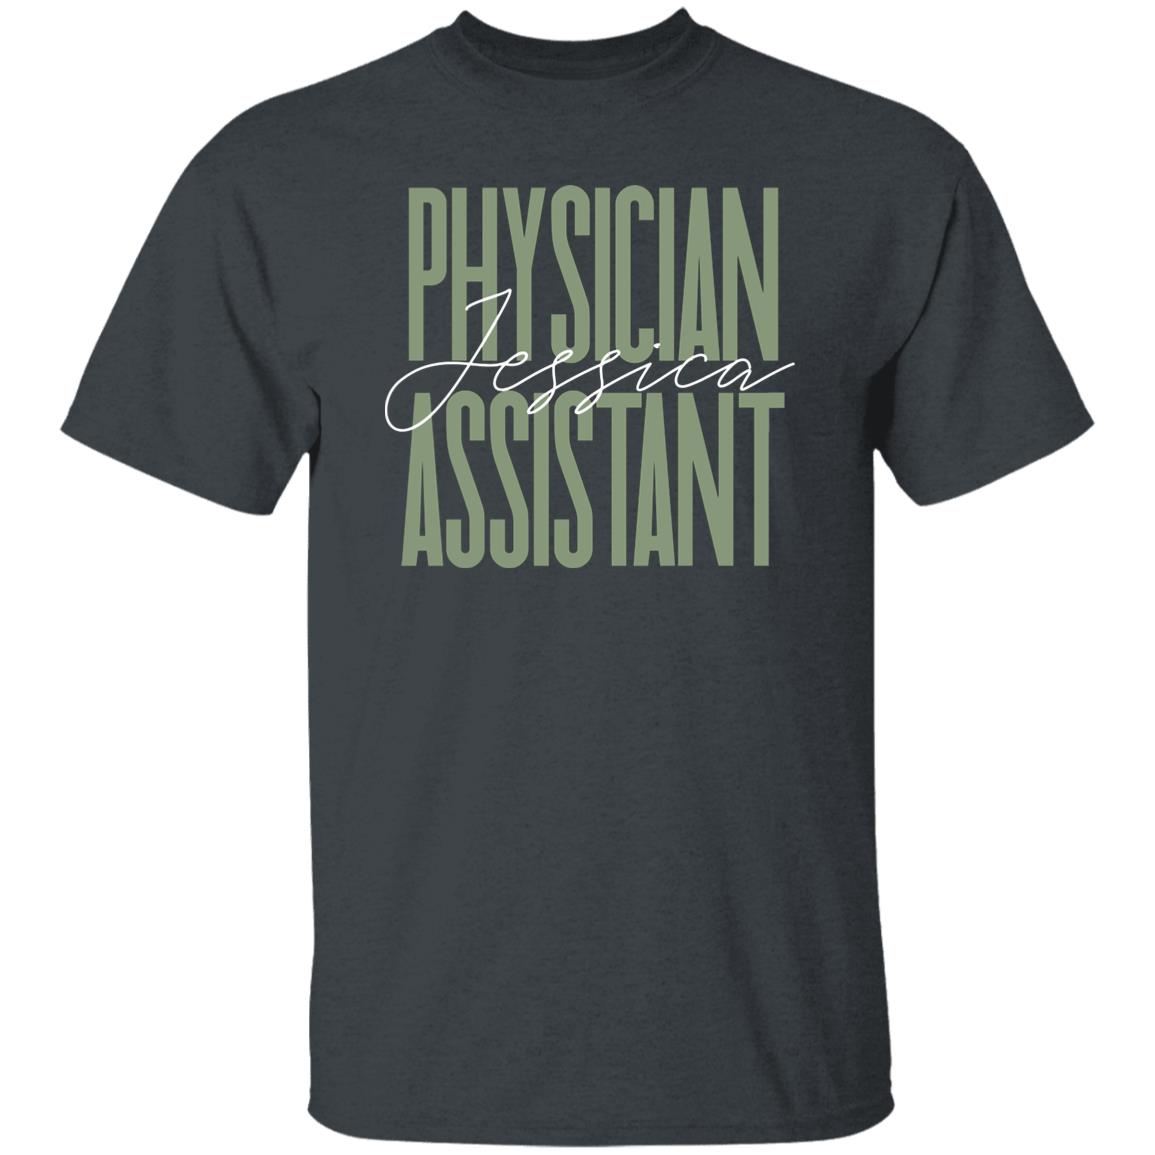 Physician assistant T-Shirt gift Doctor Assistant Customized Unisex tee Black Navy Dark Heather-Family-Gift-Planet